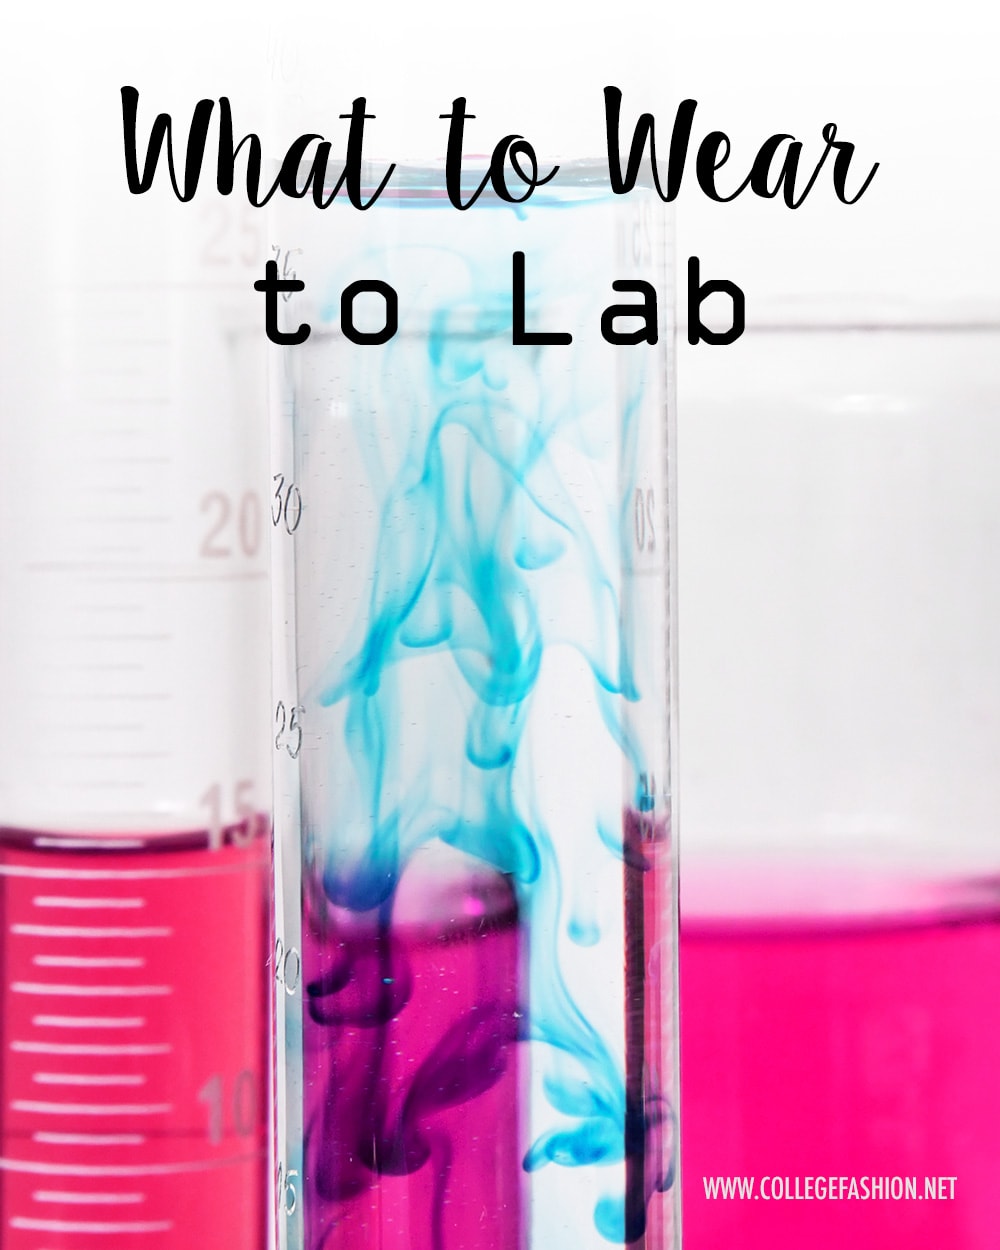 Geek Chic: What to wear to lab